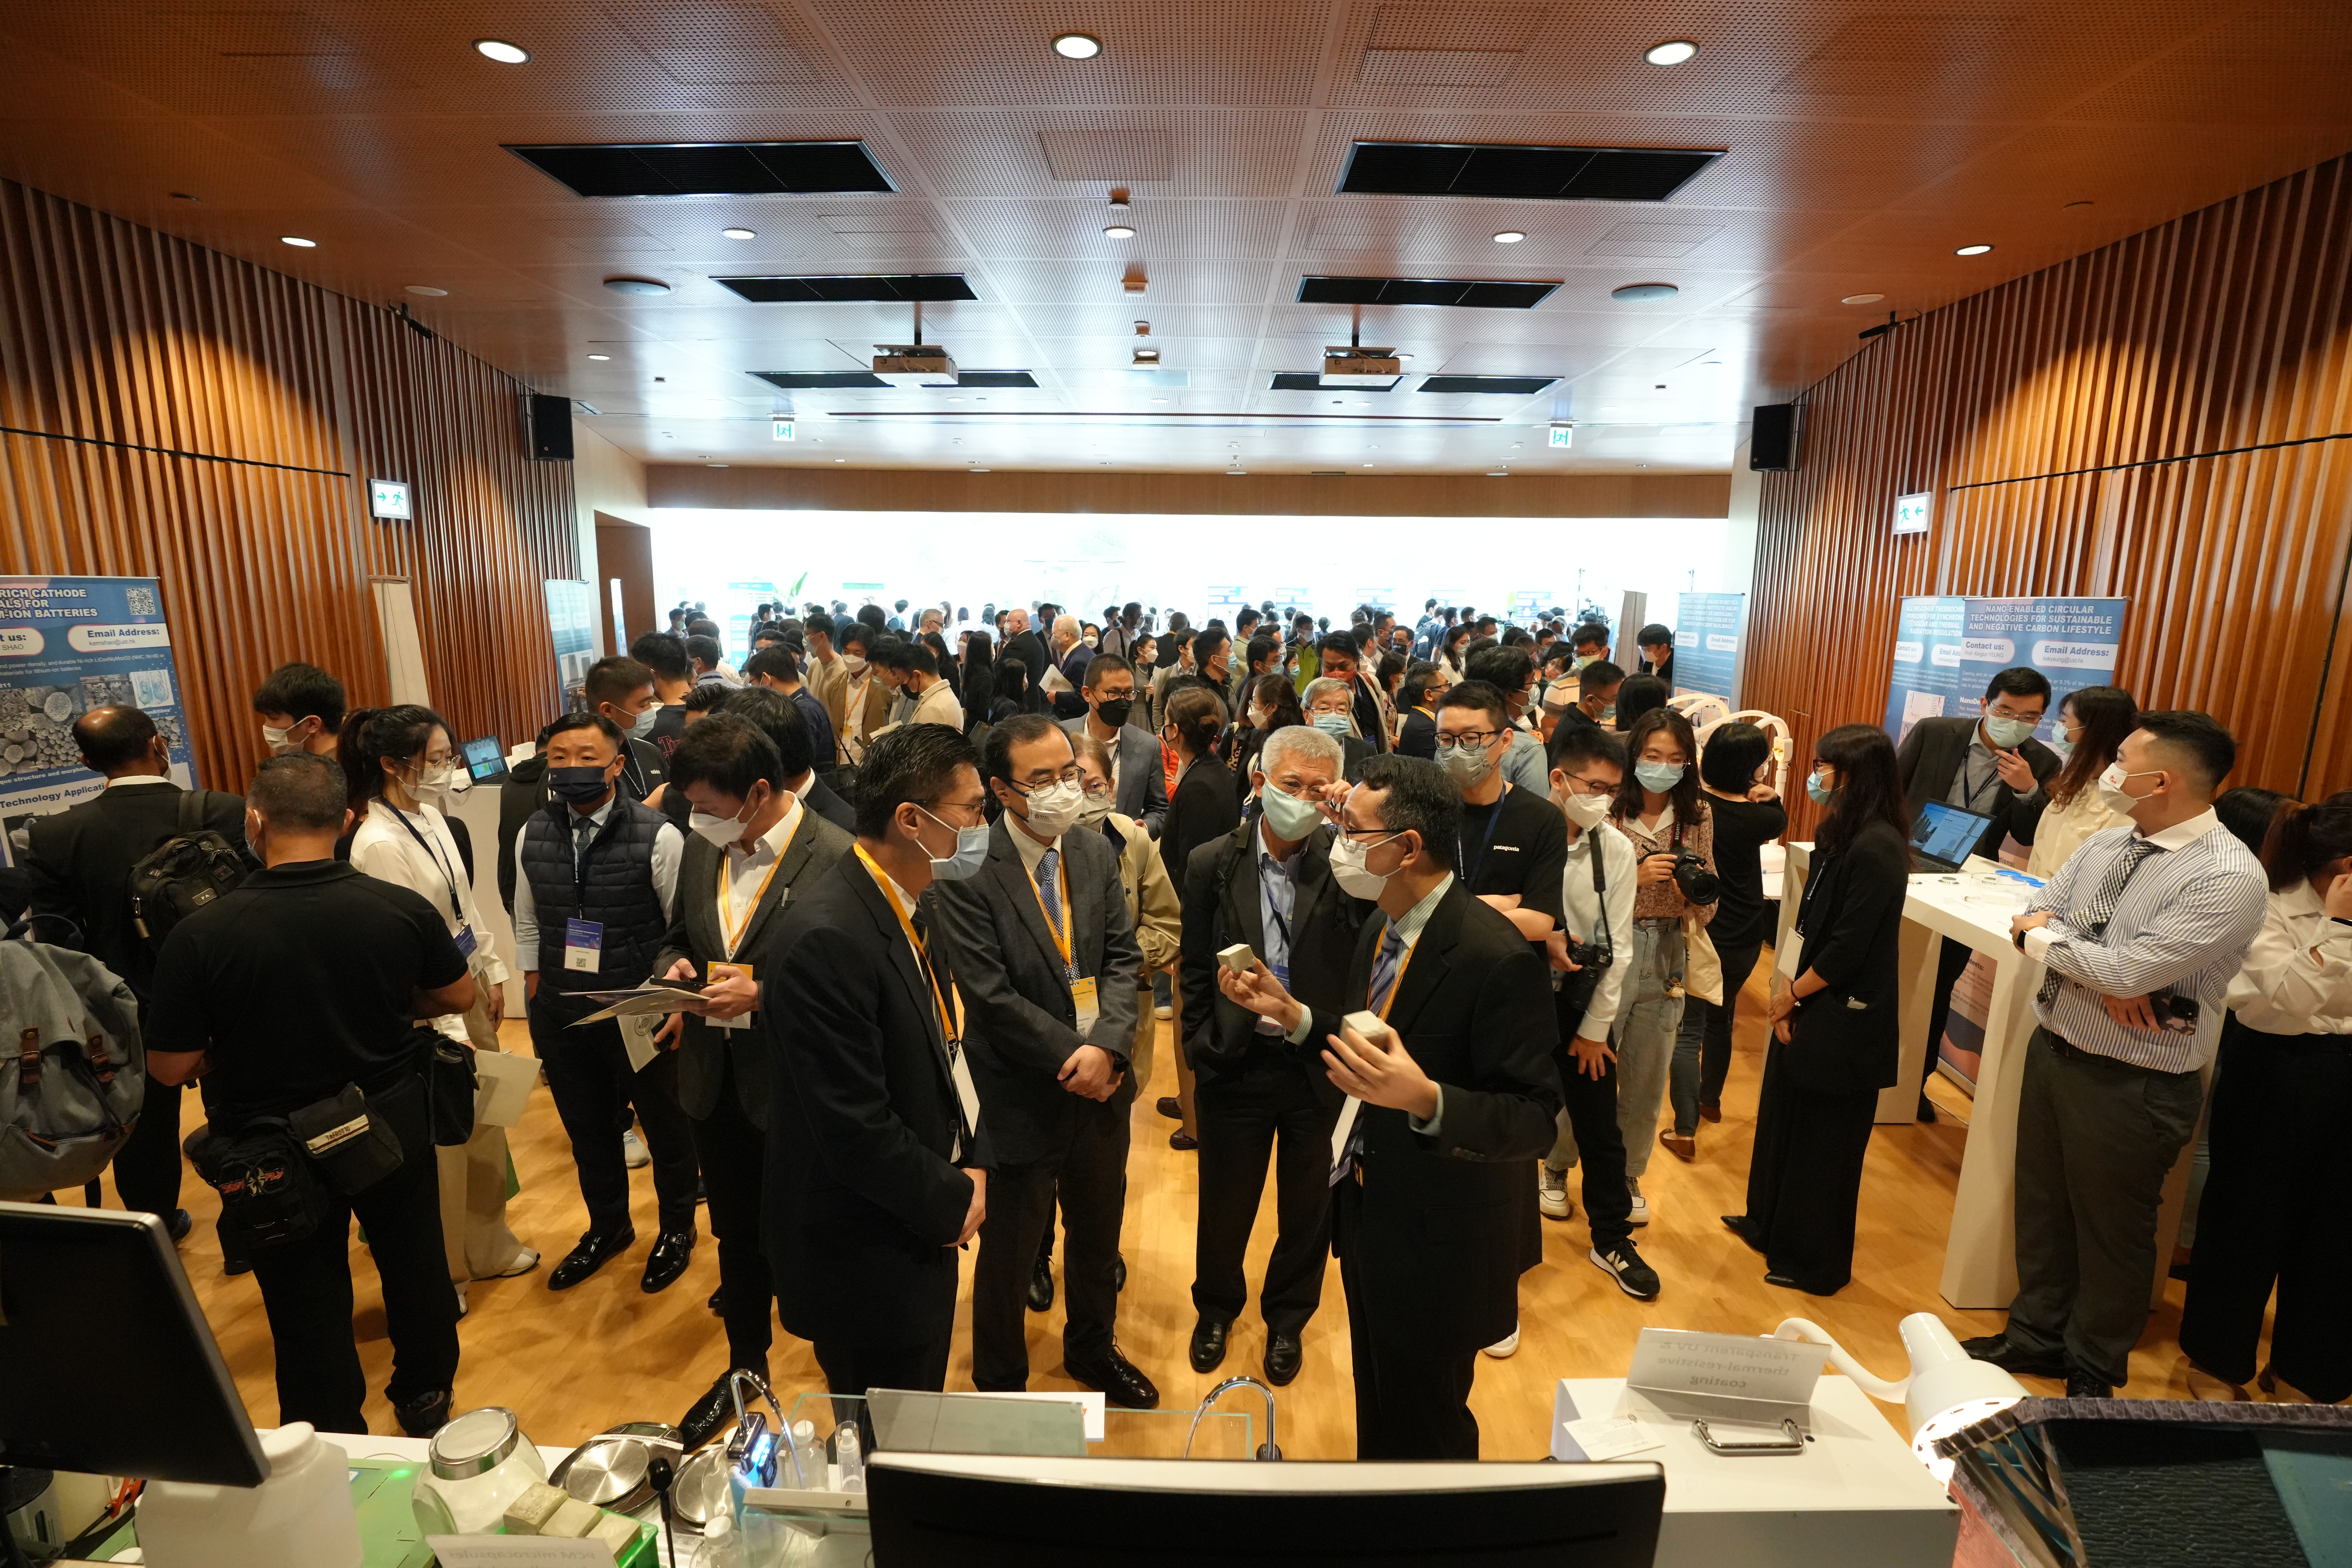 Hundreds of attendants from business, industrial, academic and technology sectors explore the inventions spanning four strategic research areas displayed at the HKUST Industry Engagement Day